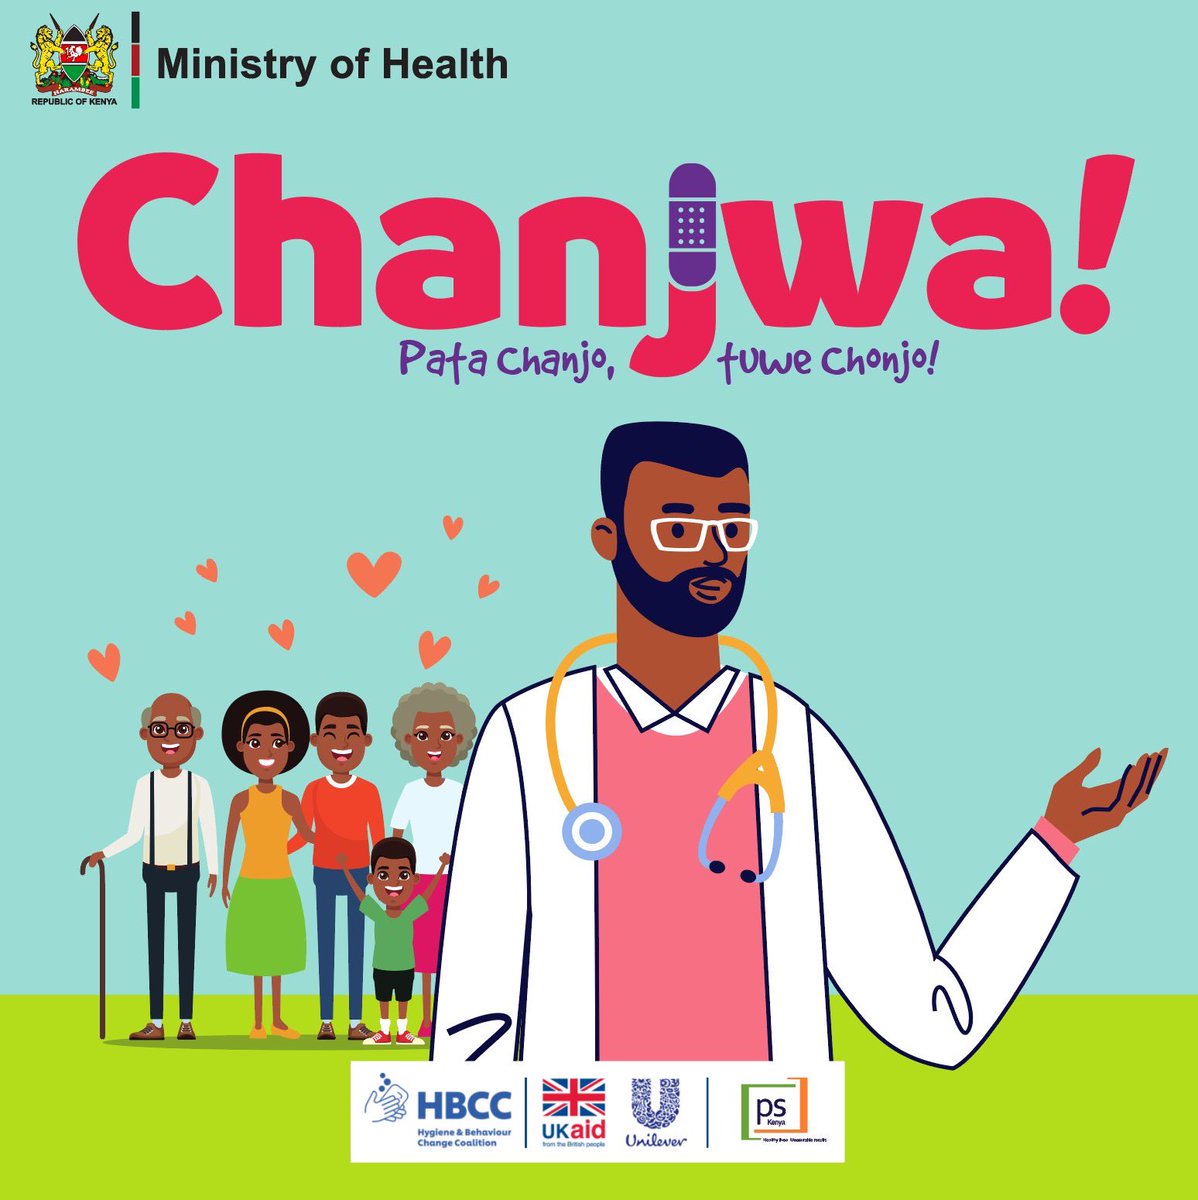 Over 6000 facilities across the country are offering the #COVID-19 vaccine. Walk into your nearest health facility and complete your recommended dose.   Chanjwa! Pata Chanjo, tuwe Chonjo!   #Chanjwa #TuweChonjo